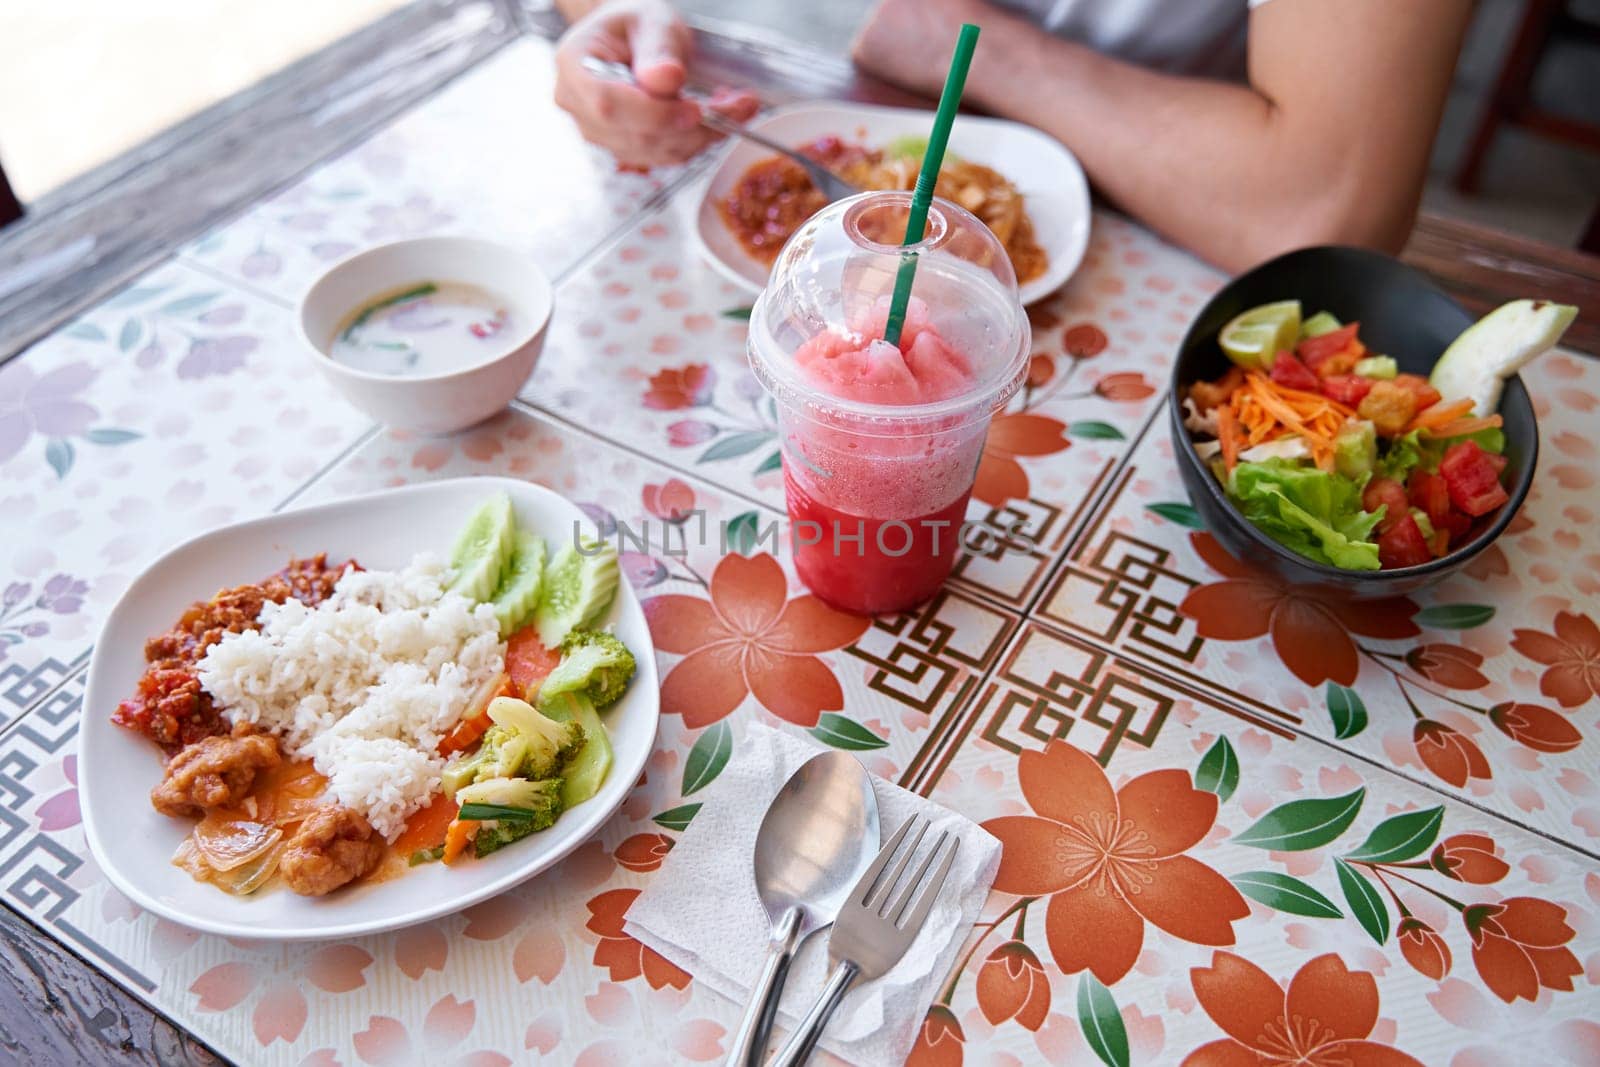 Delicious Thai Cuisine: Plates and People Dining at a Local Cafe by Try_my_best